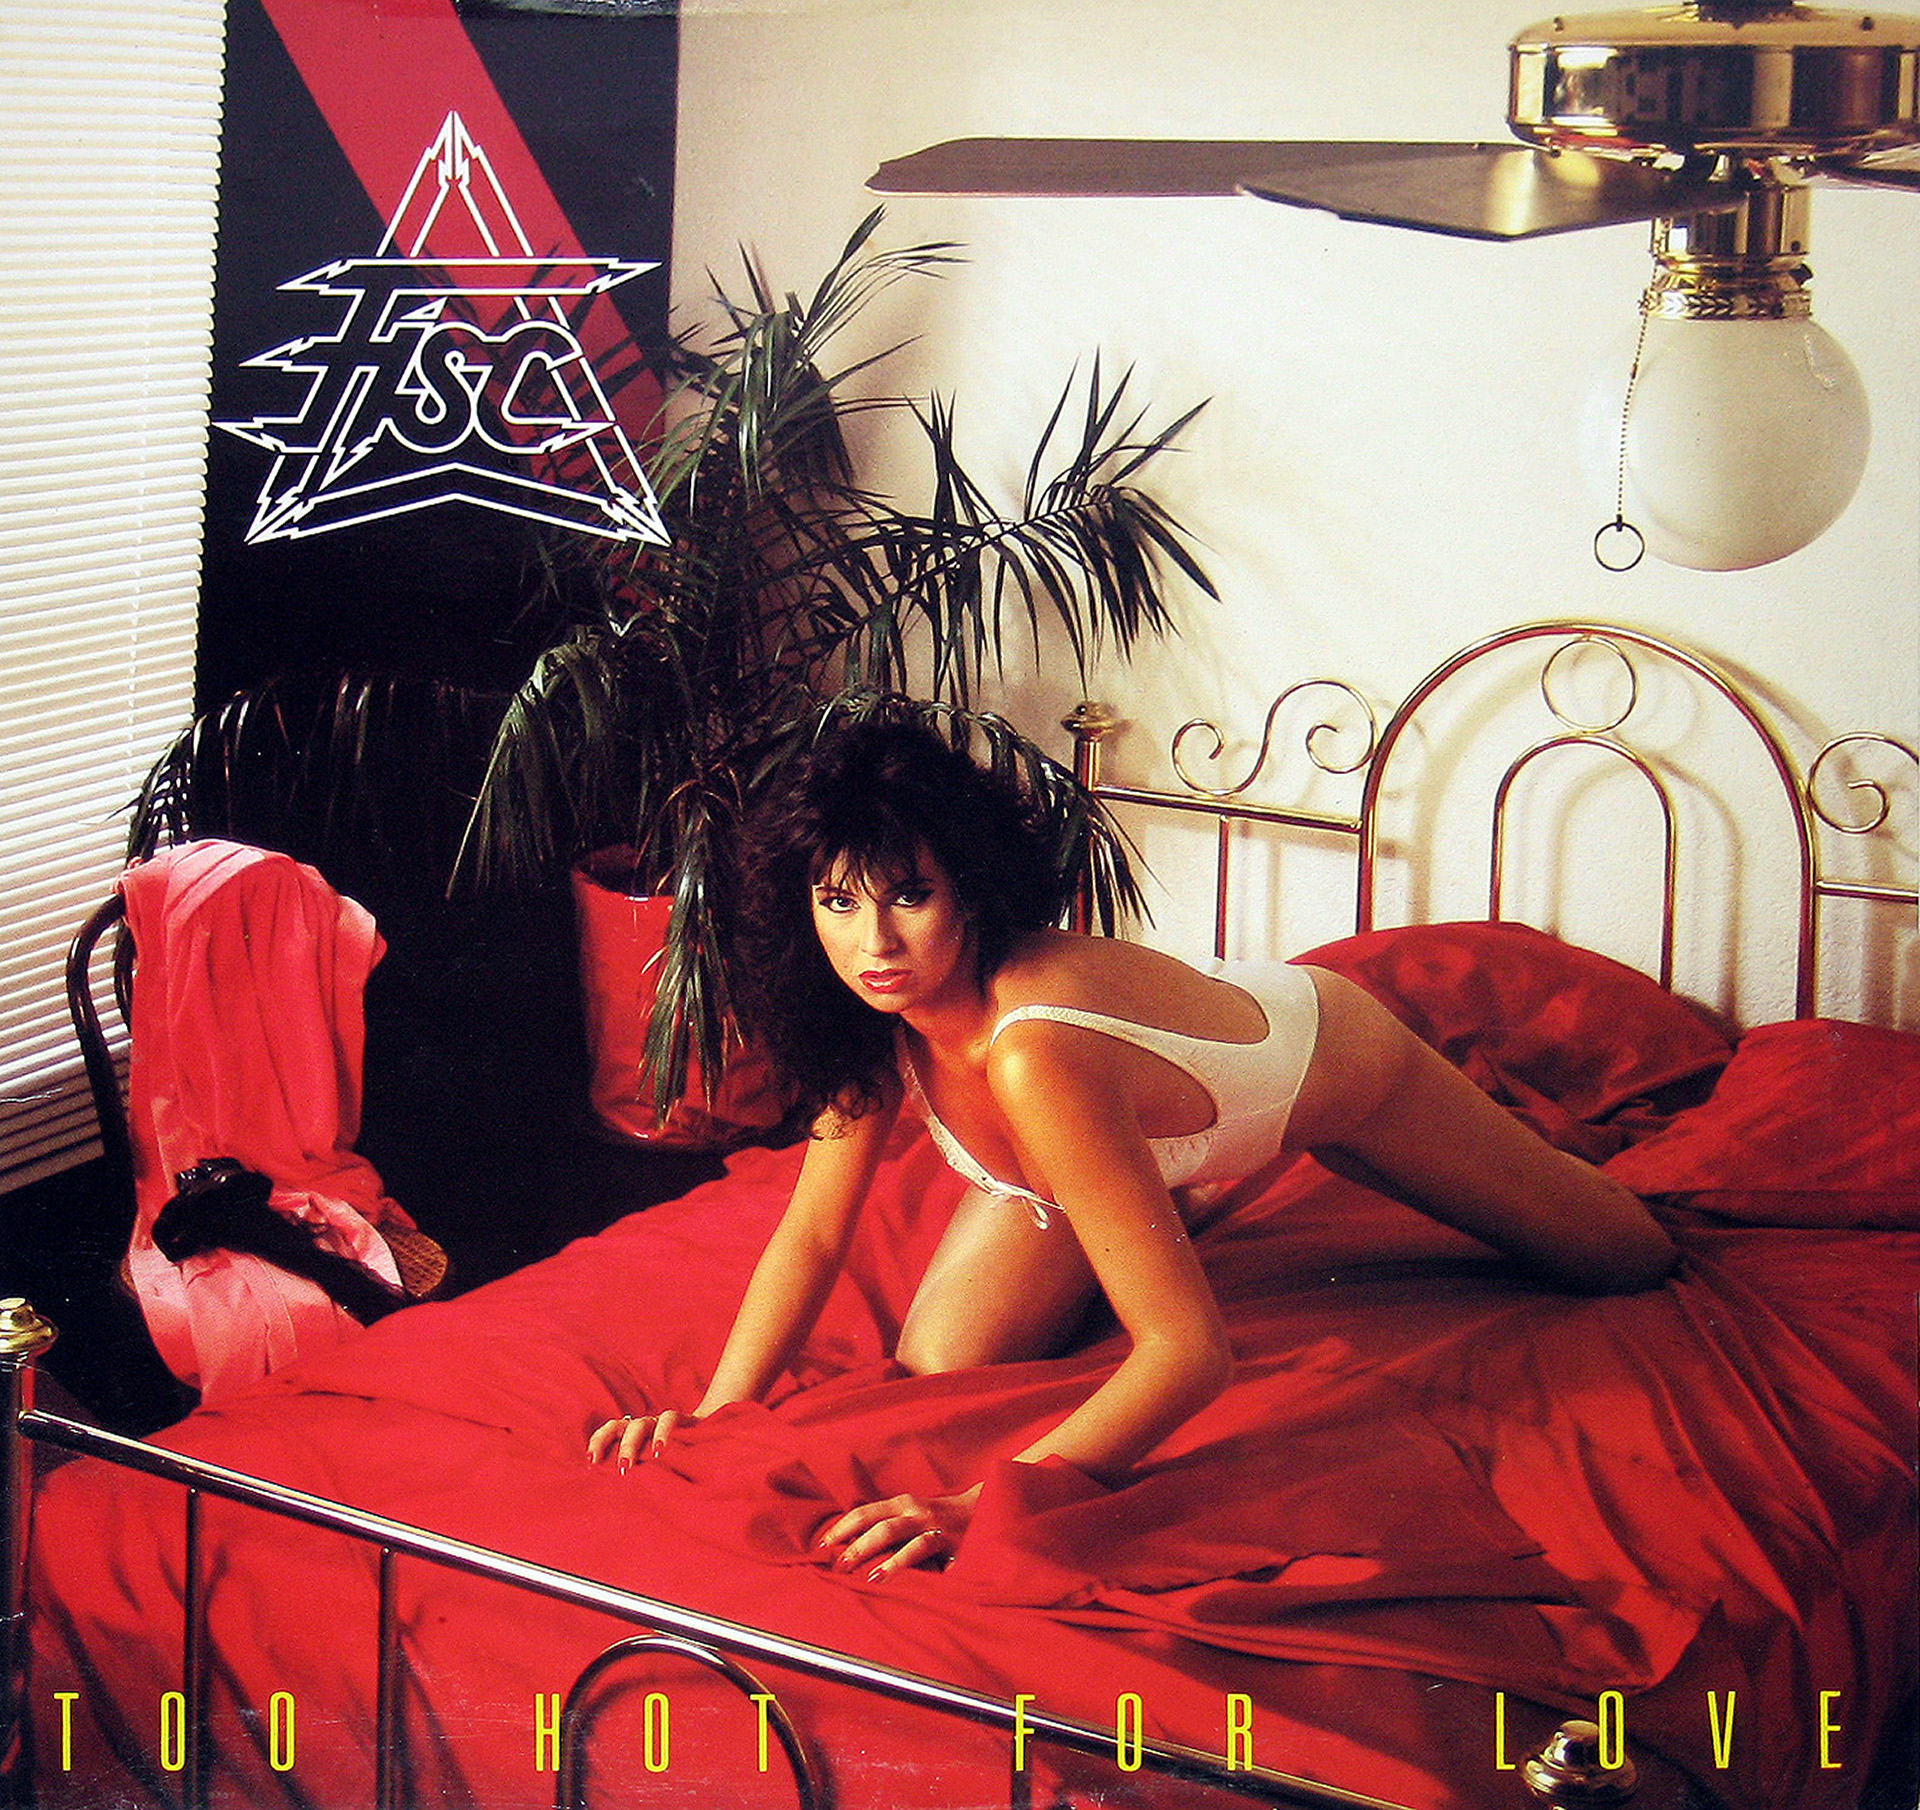 Sexy Model On Top Of The Bed , Album Front Cover Of "Too Hot For Love"